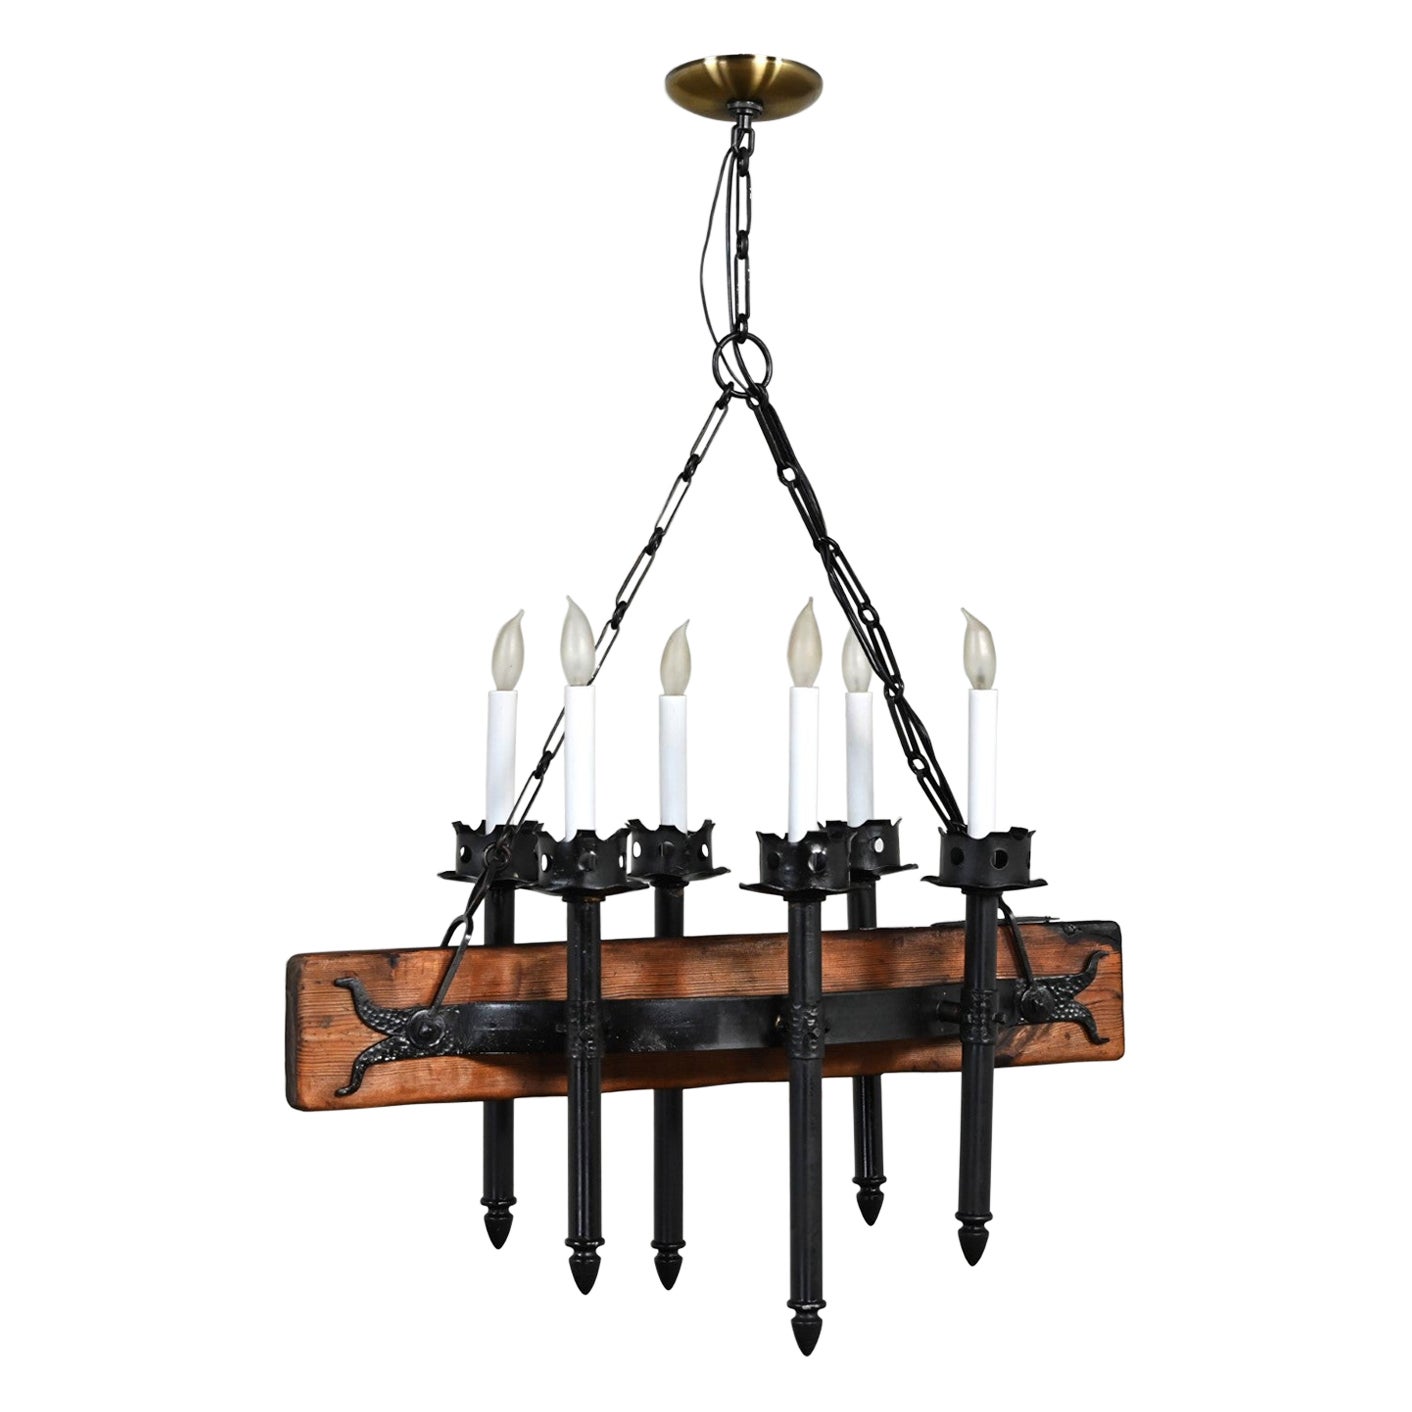 Medieval Gothic Spanish Revival Iron & Wood Beam Hanging Light Fixture Mexico For Sale